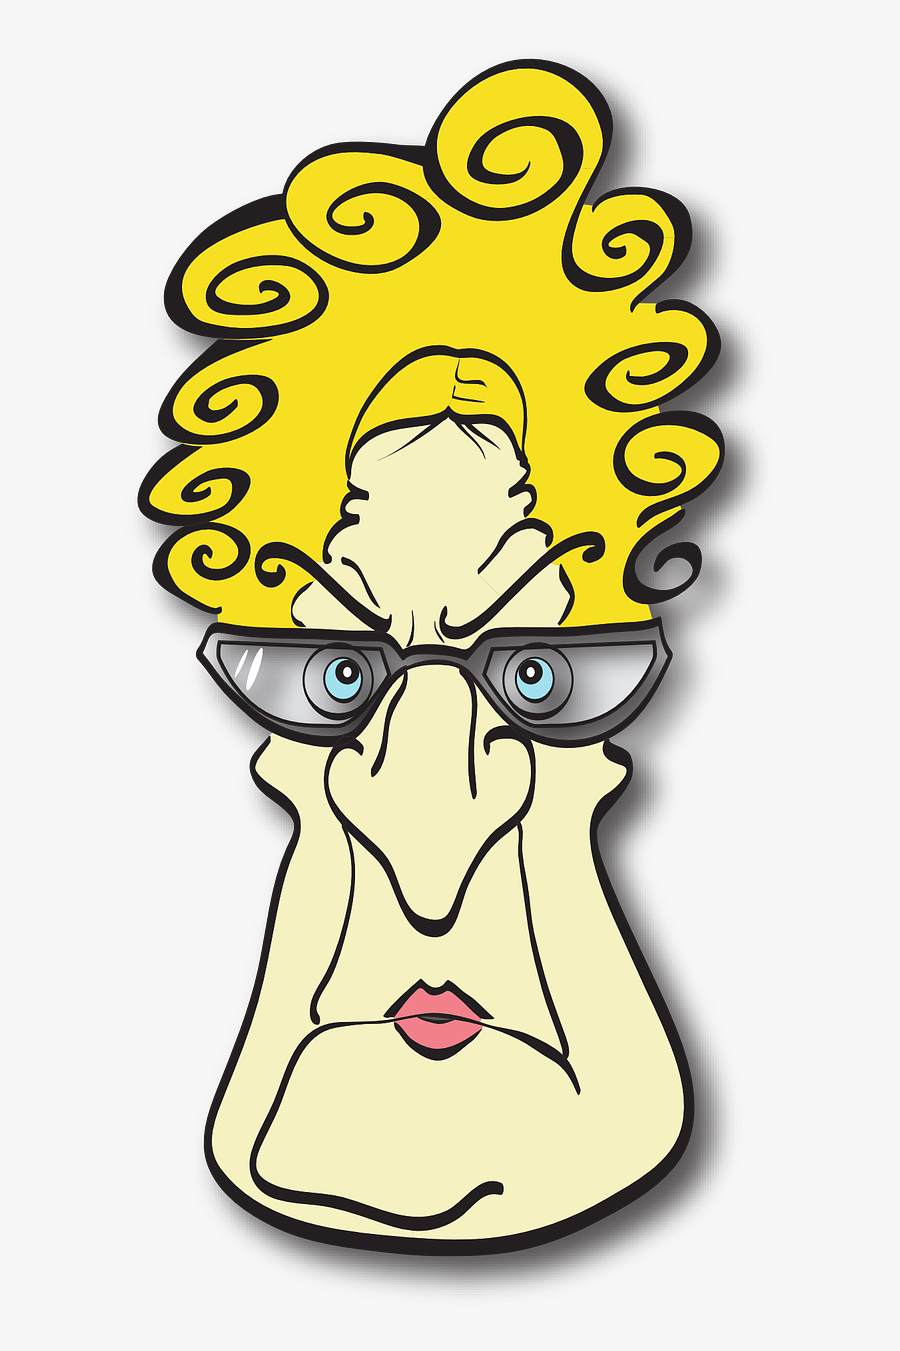 Old lady cartoon character with glasses